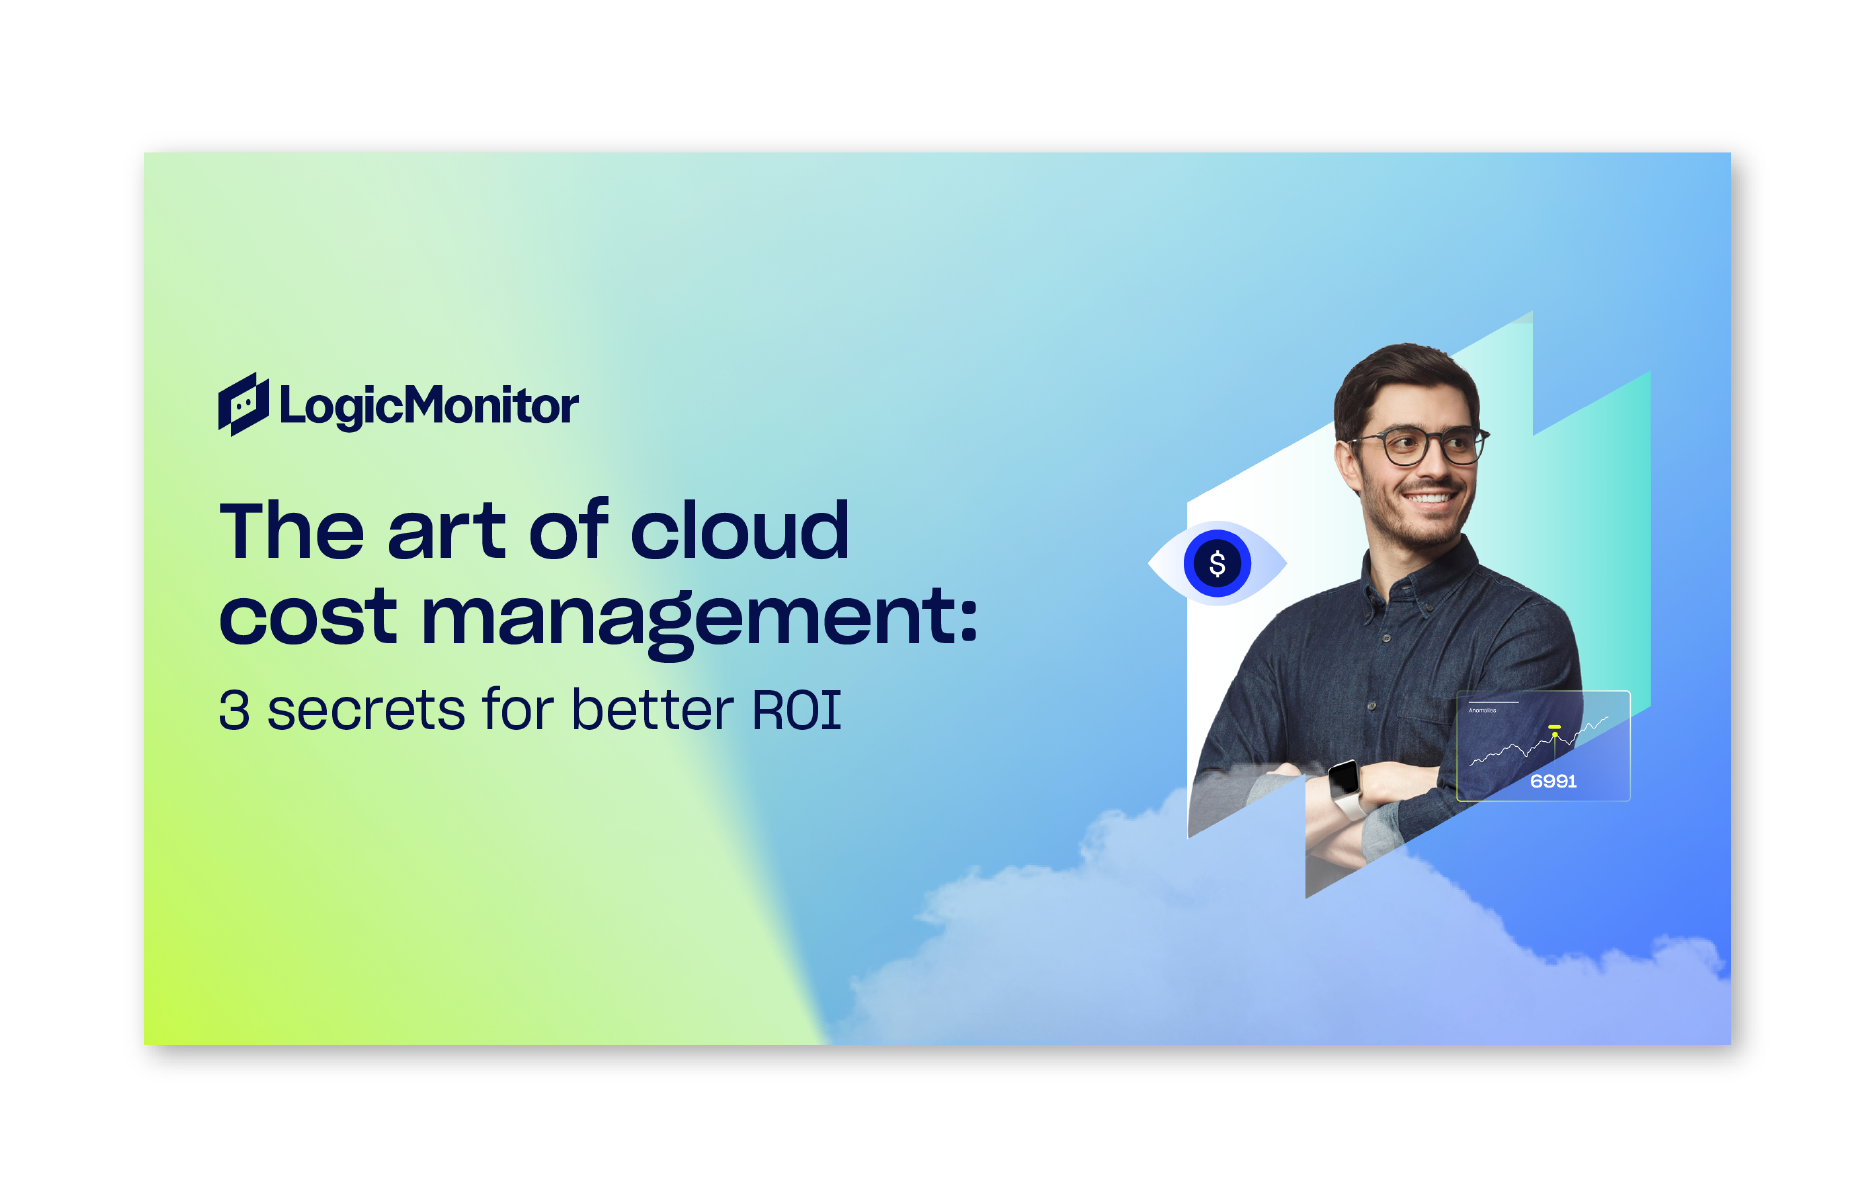 The art of cloud cost management